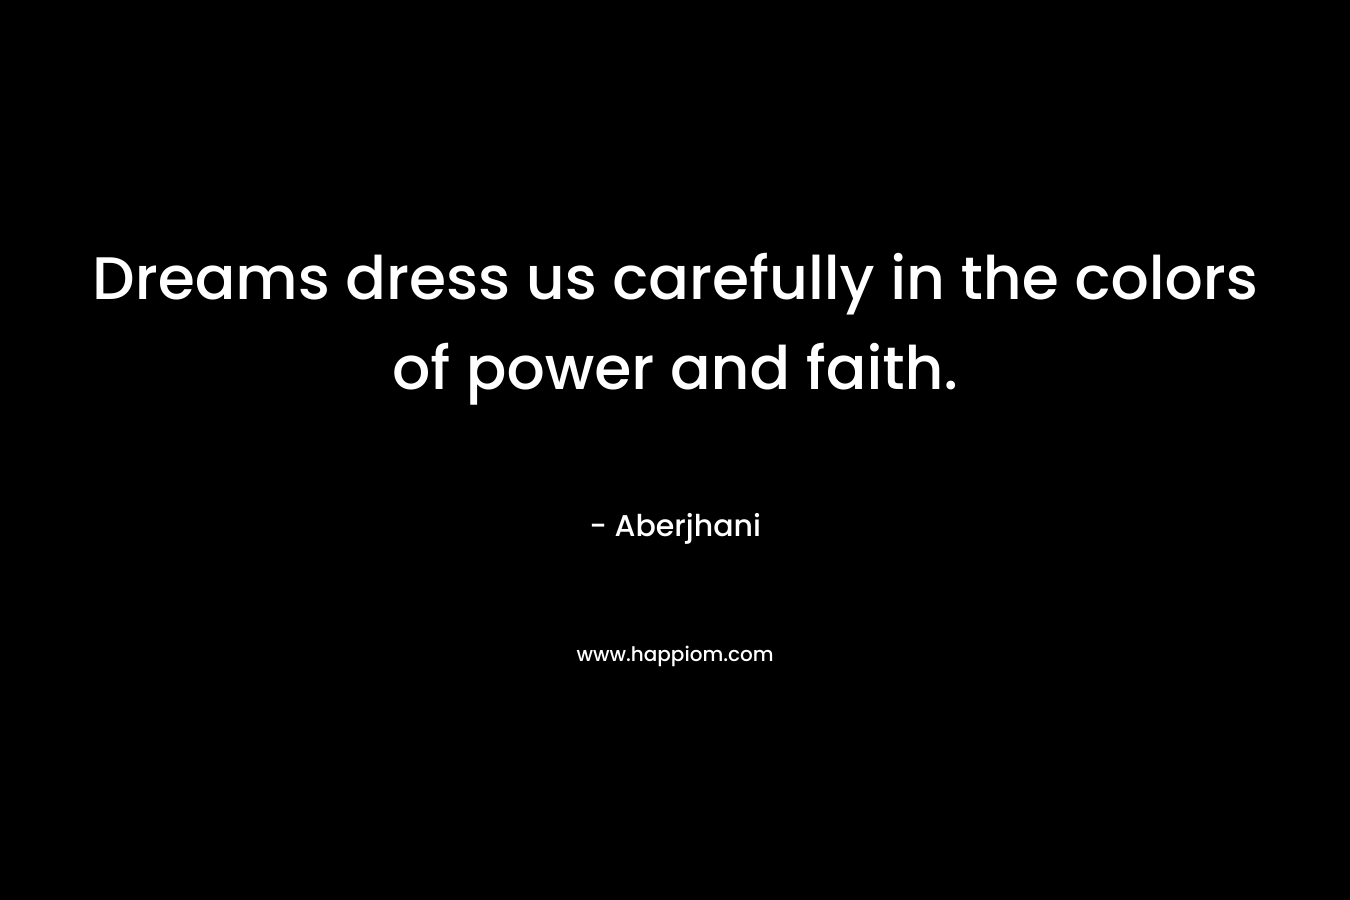 Dreams dress us carefully in the colors of power and faith. – Aberjhani